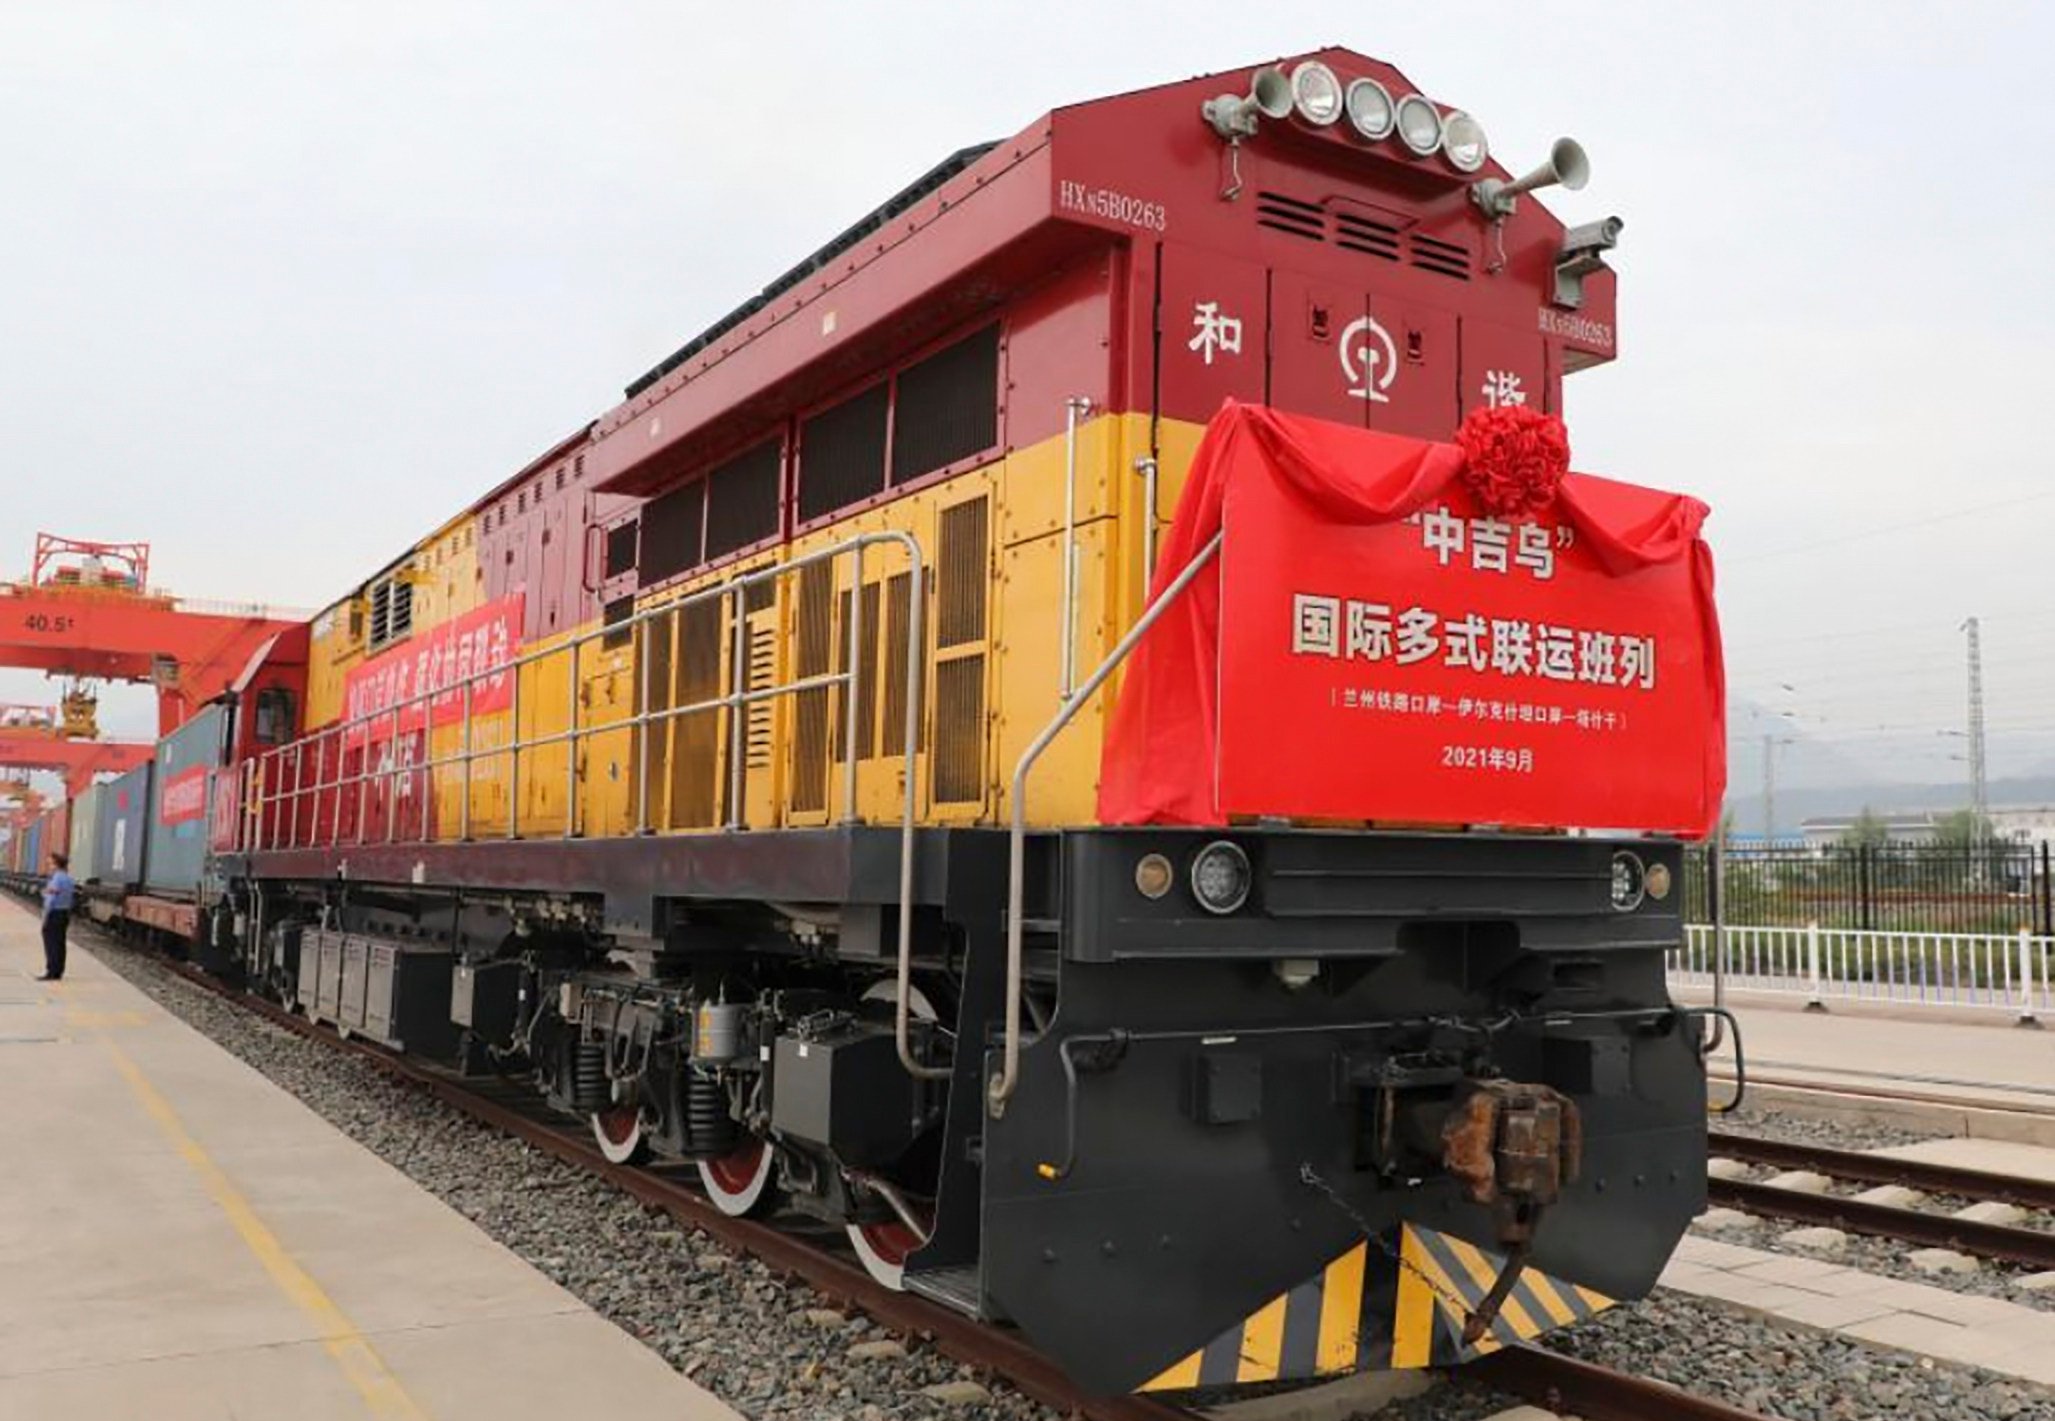 Construction on the CKU railway, originally conceived in the mid-1990s, is expected to start this year after Beijing finally reached an agreement with Uzbekistan and Kyrgyzstan last year. Photo: Handout